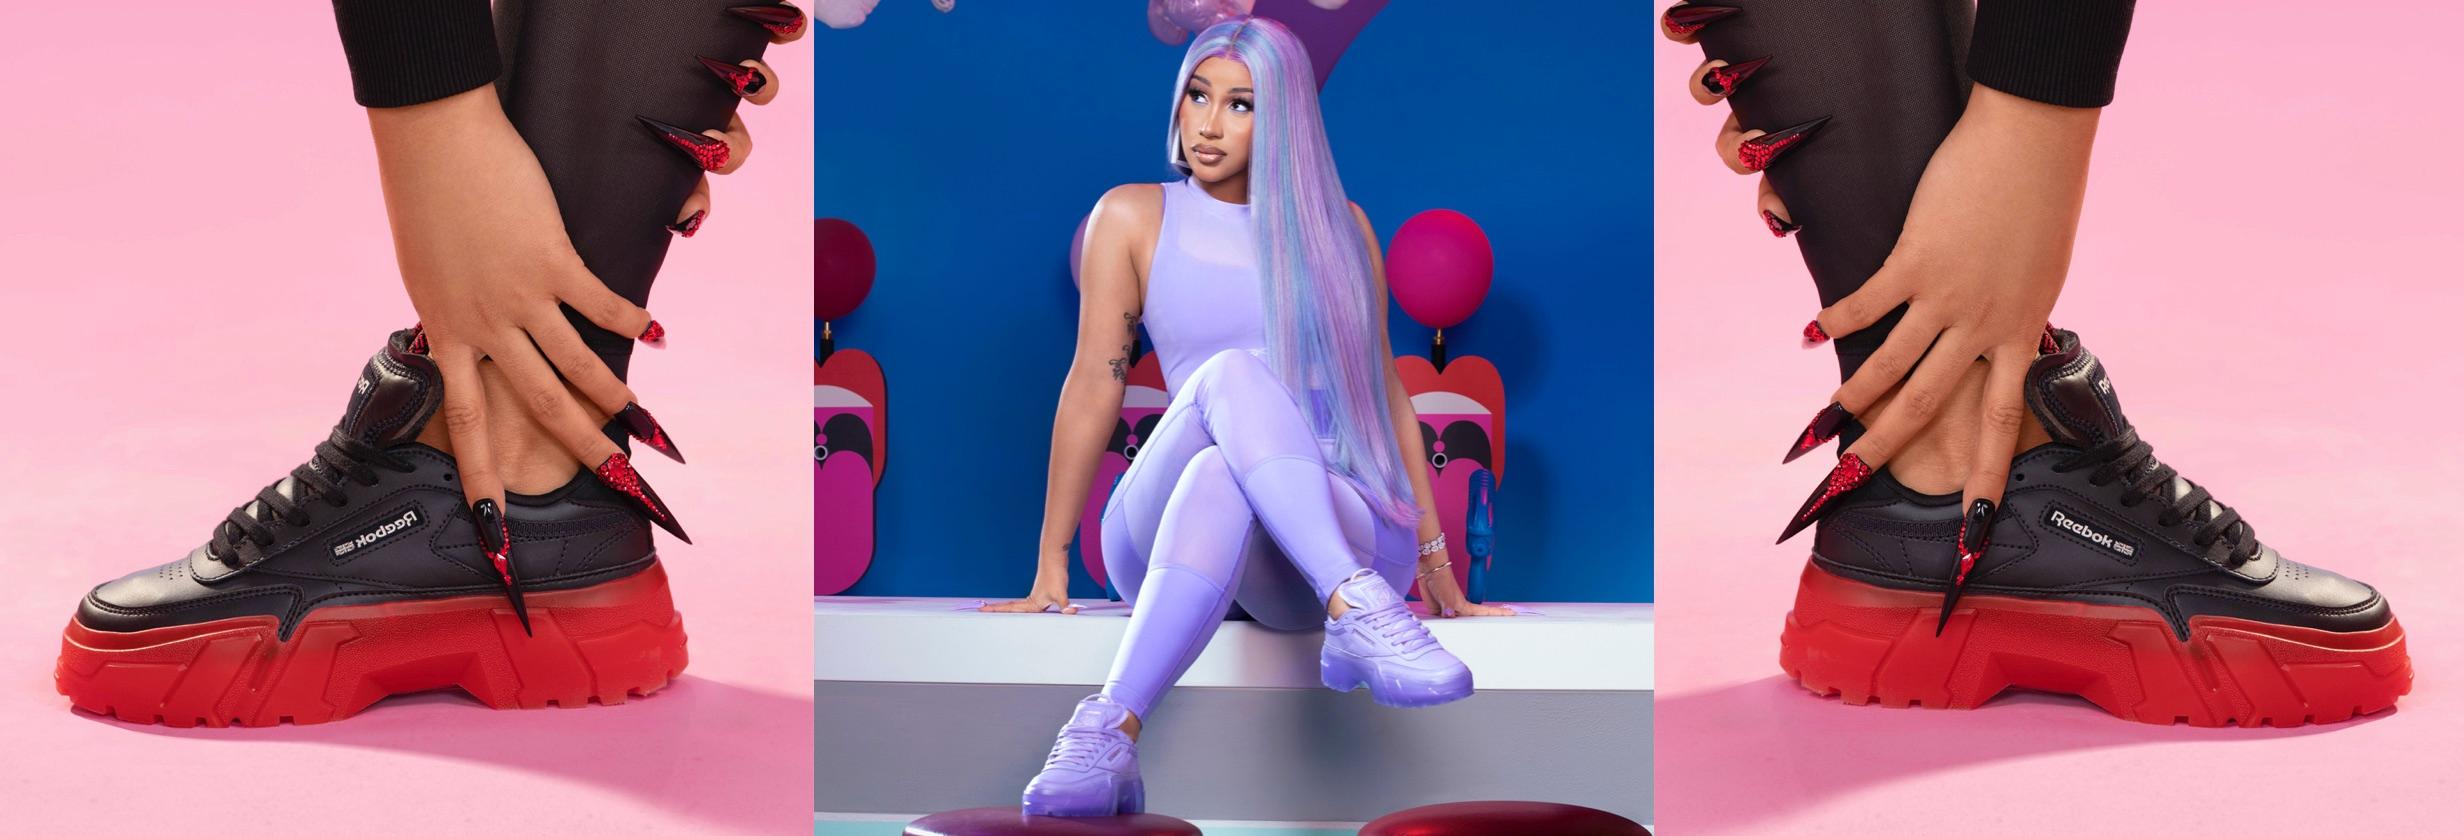 Cardi B launches ‘Summertime Fine’ Collection with Reebok